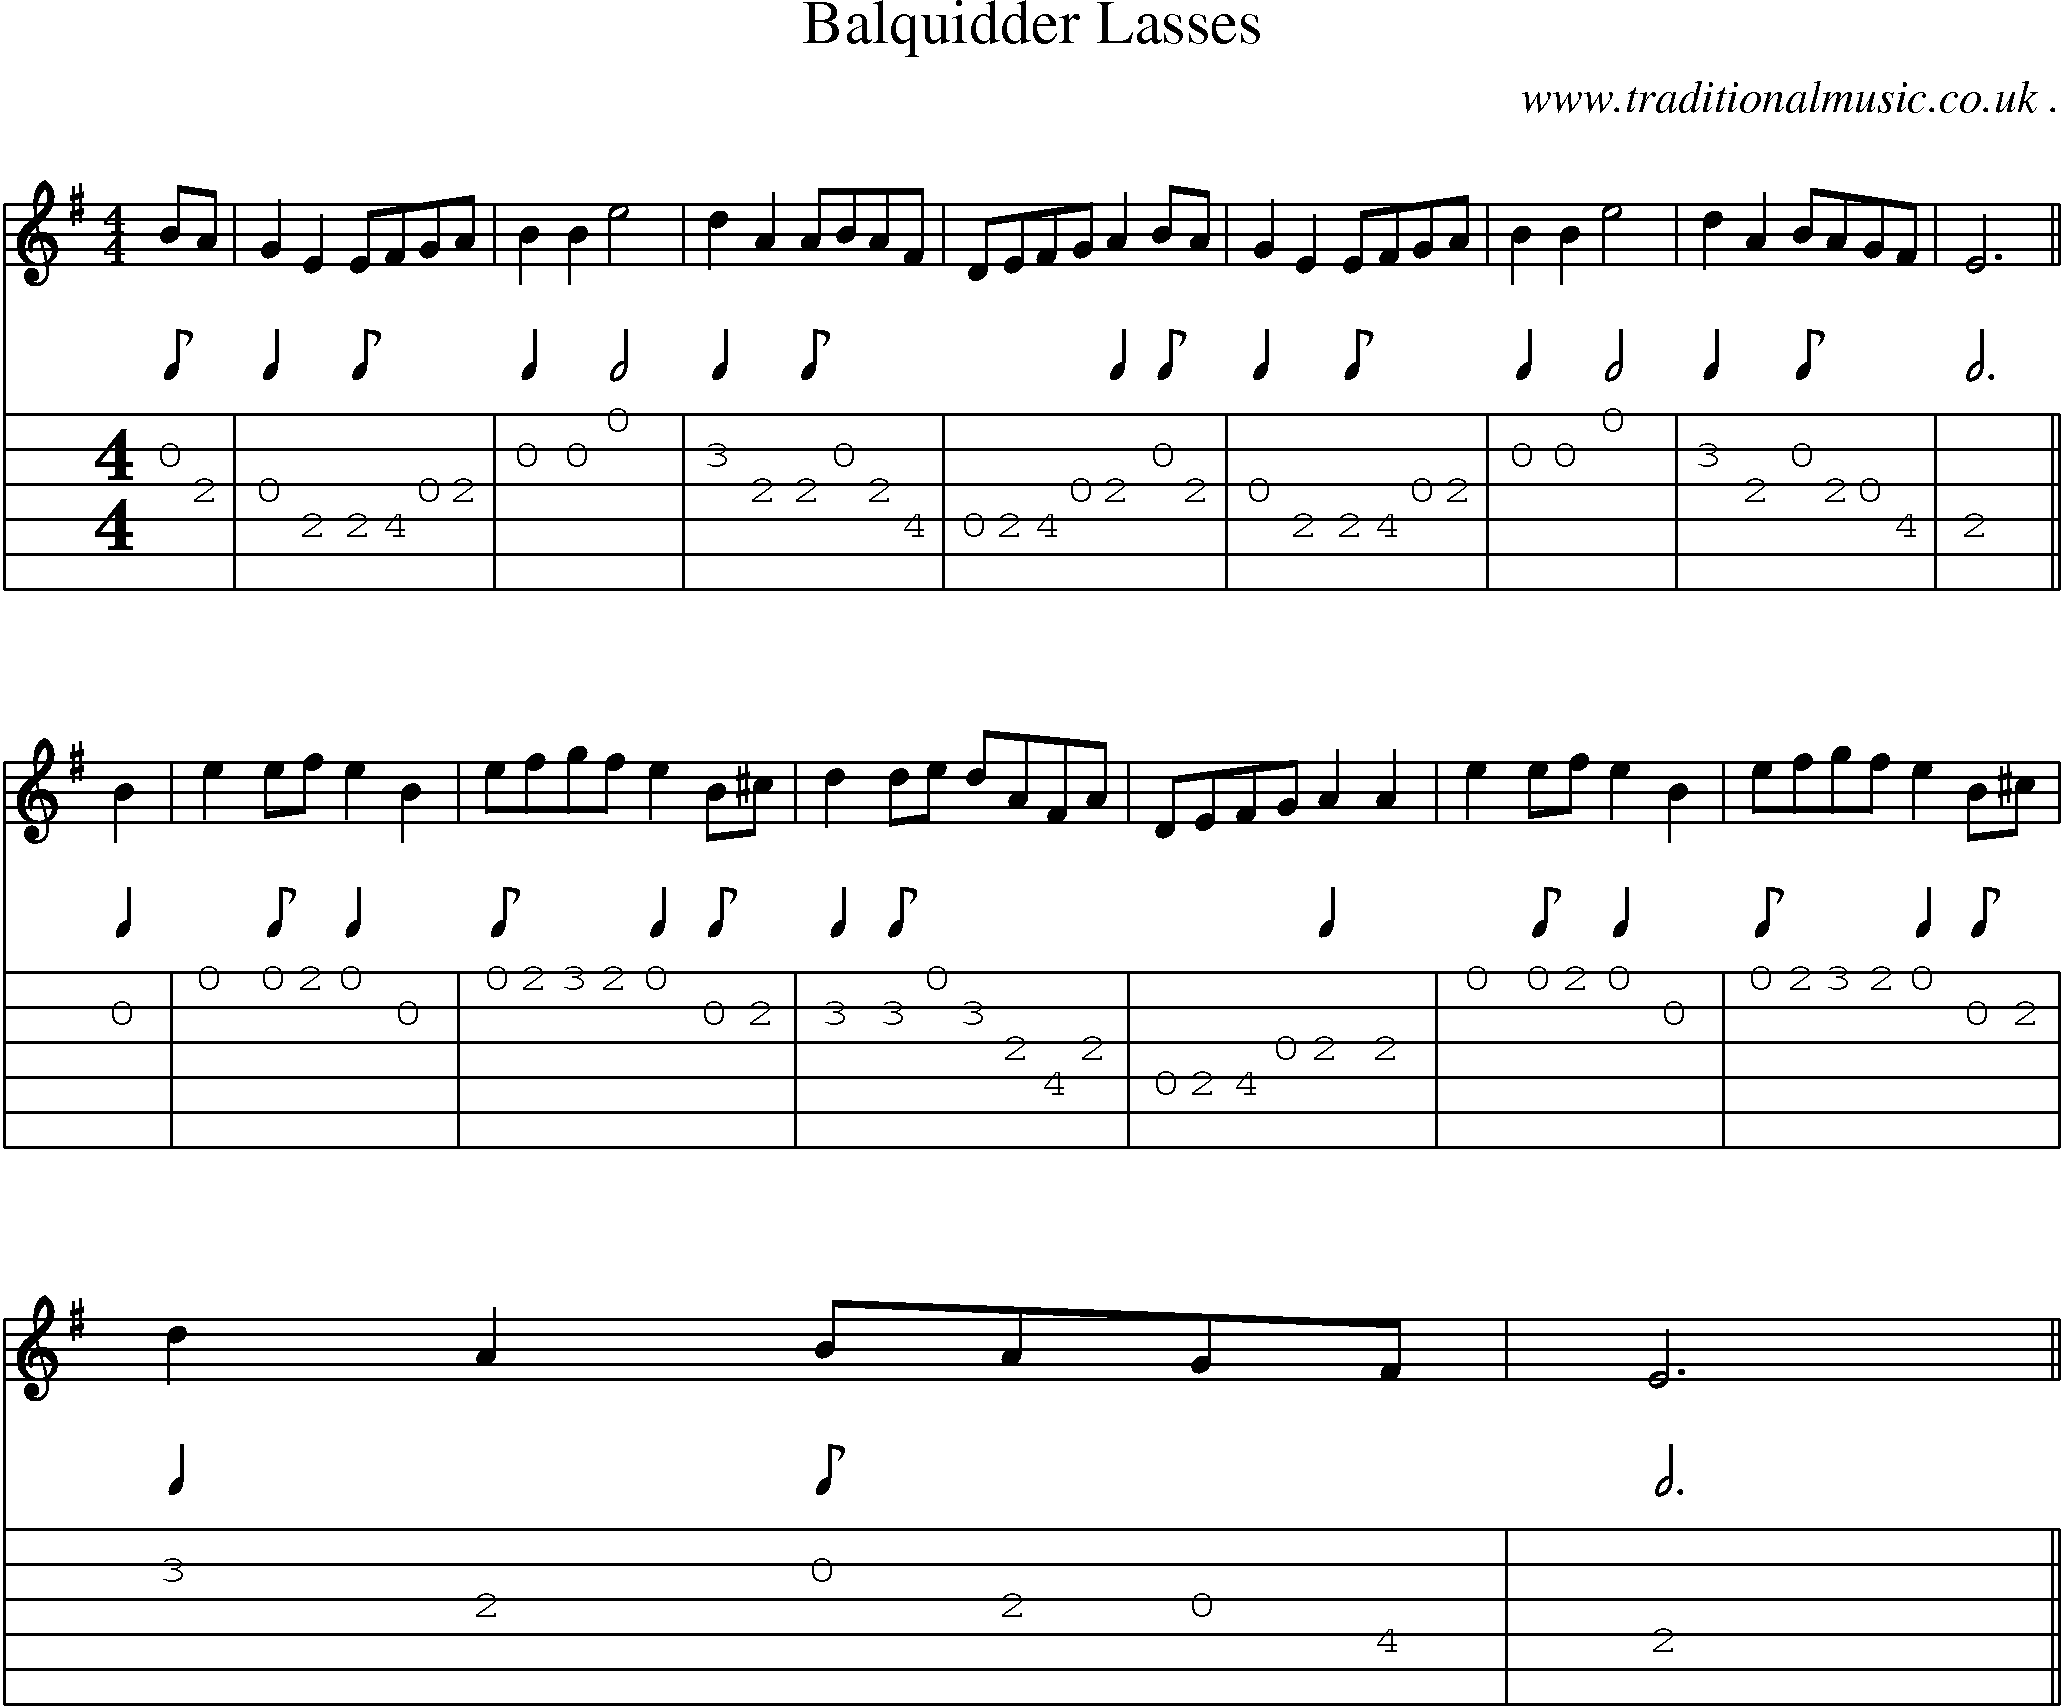 Sheet-Music and Guitar Tabs for Balquidder Lasses